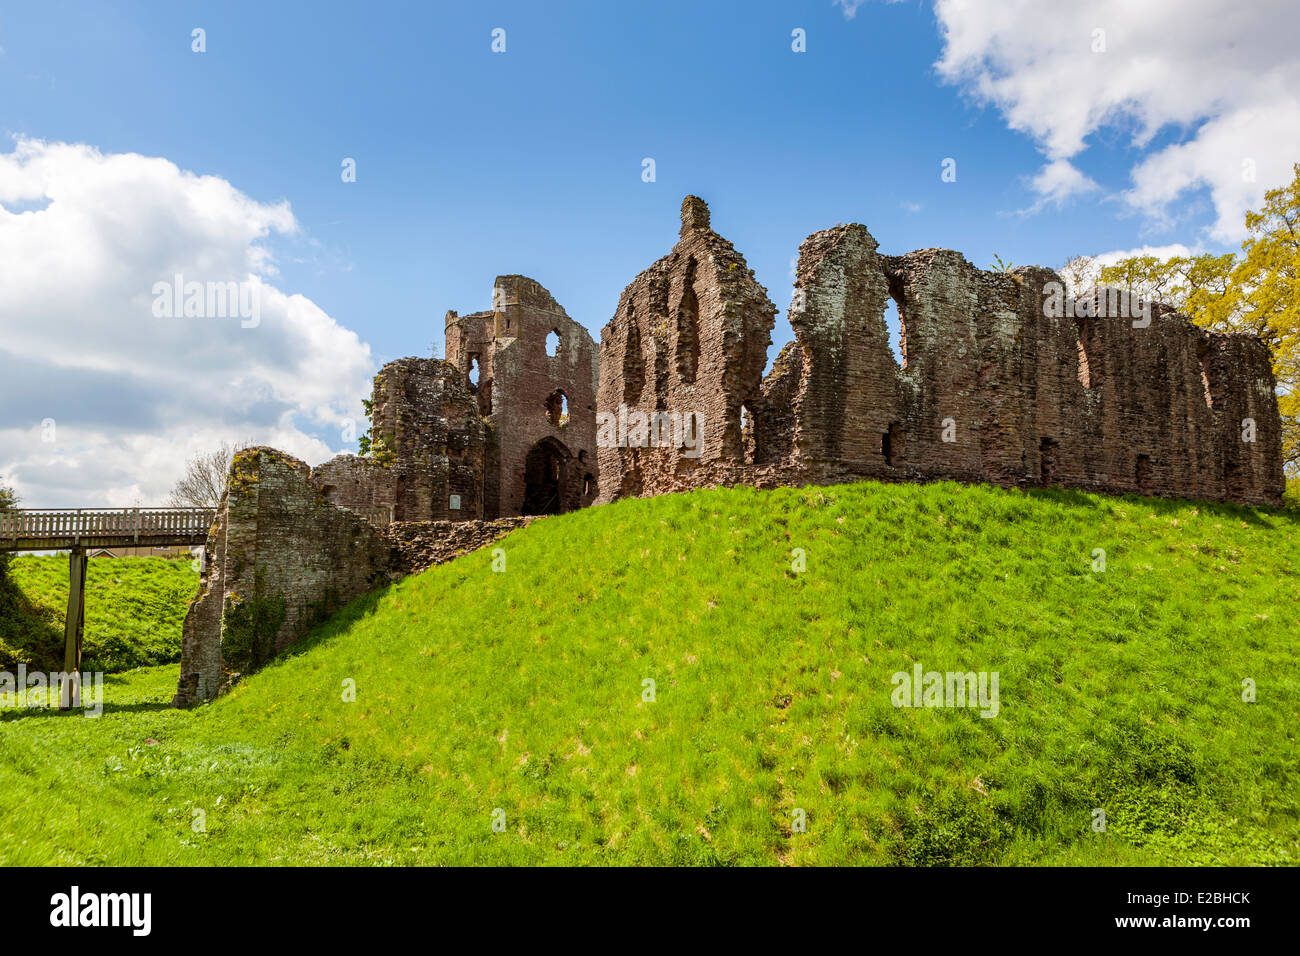 Ruined 13th century Grosmont Castle, Monmouthshire, Wales, United Kingdom, Europe. Stock Photo